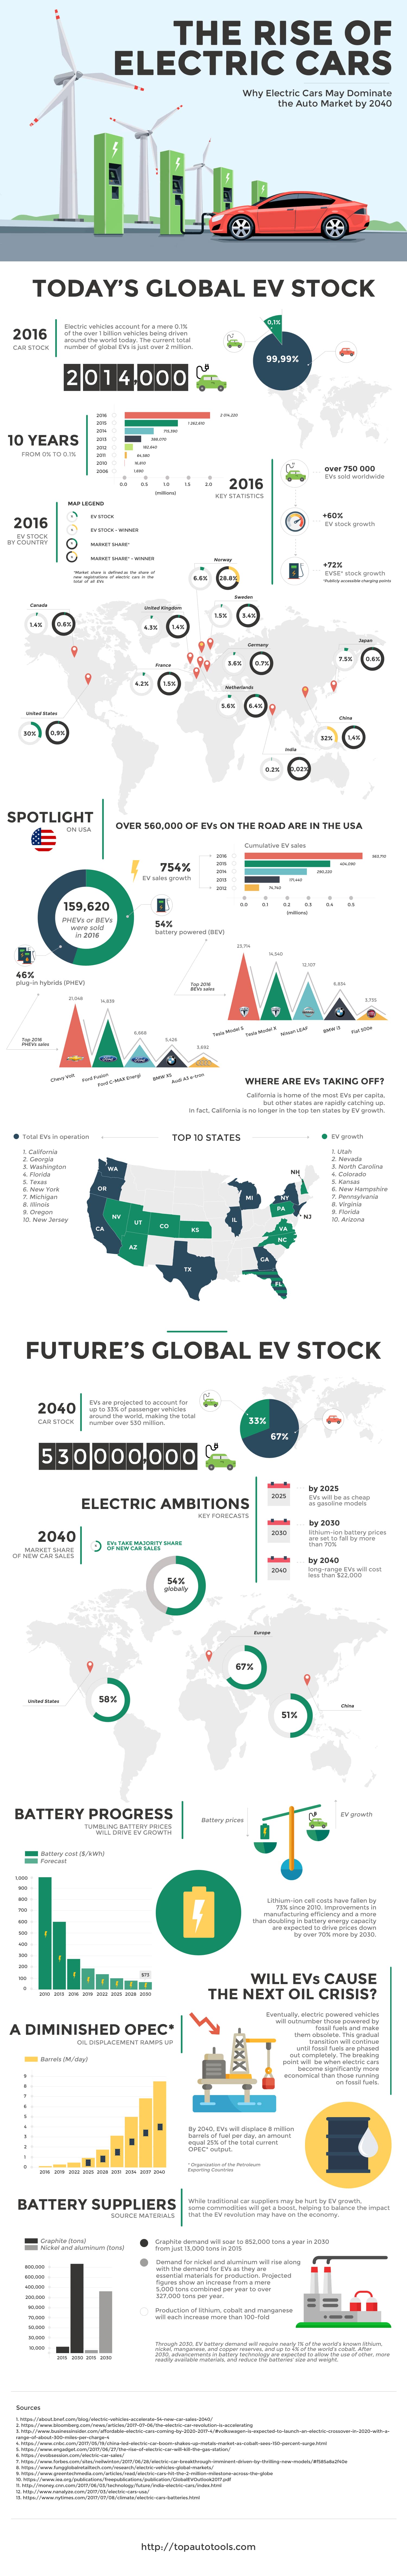 The Unstoppable And Incredible Rise Of Electric Cars [Infographic]